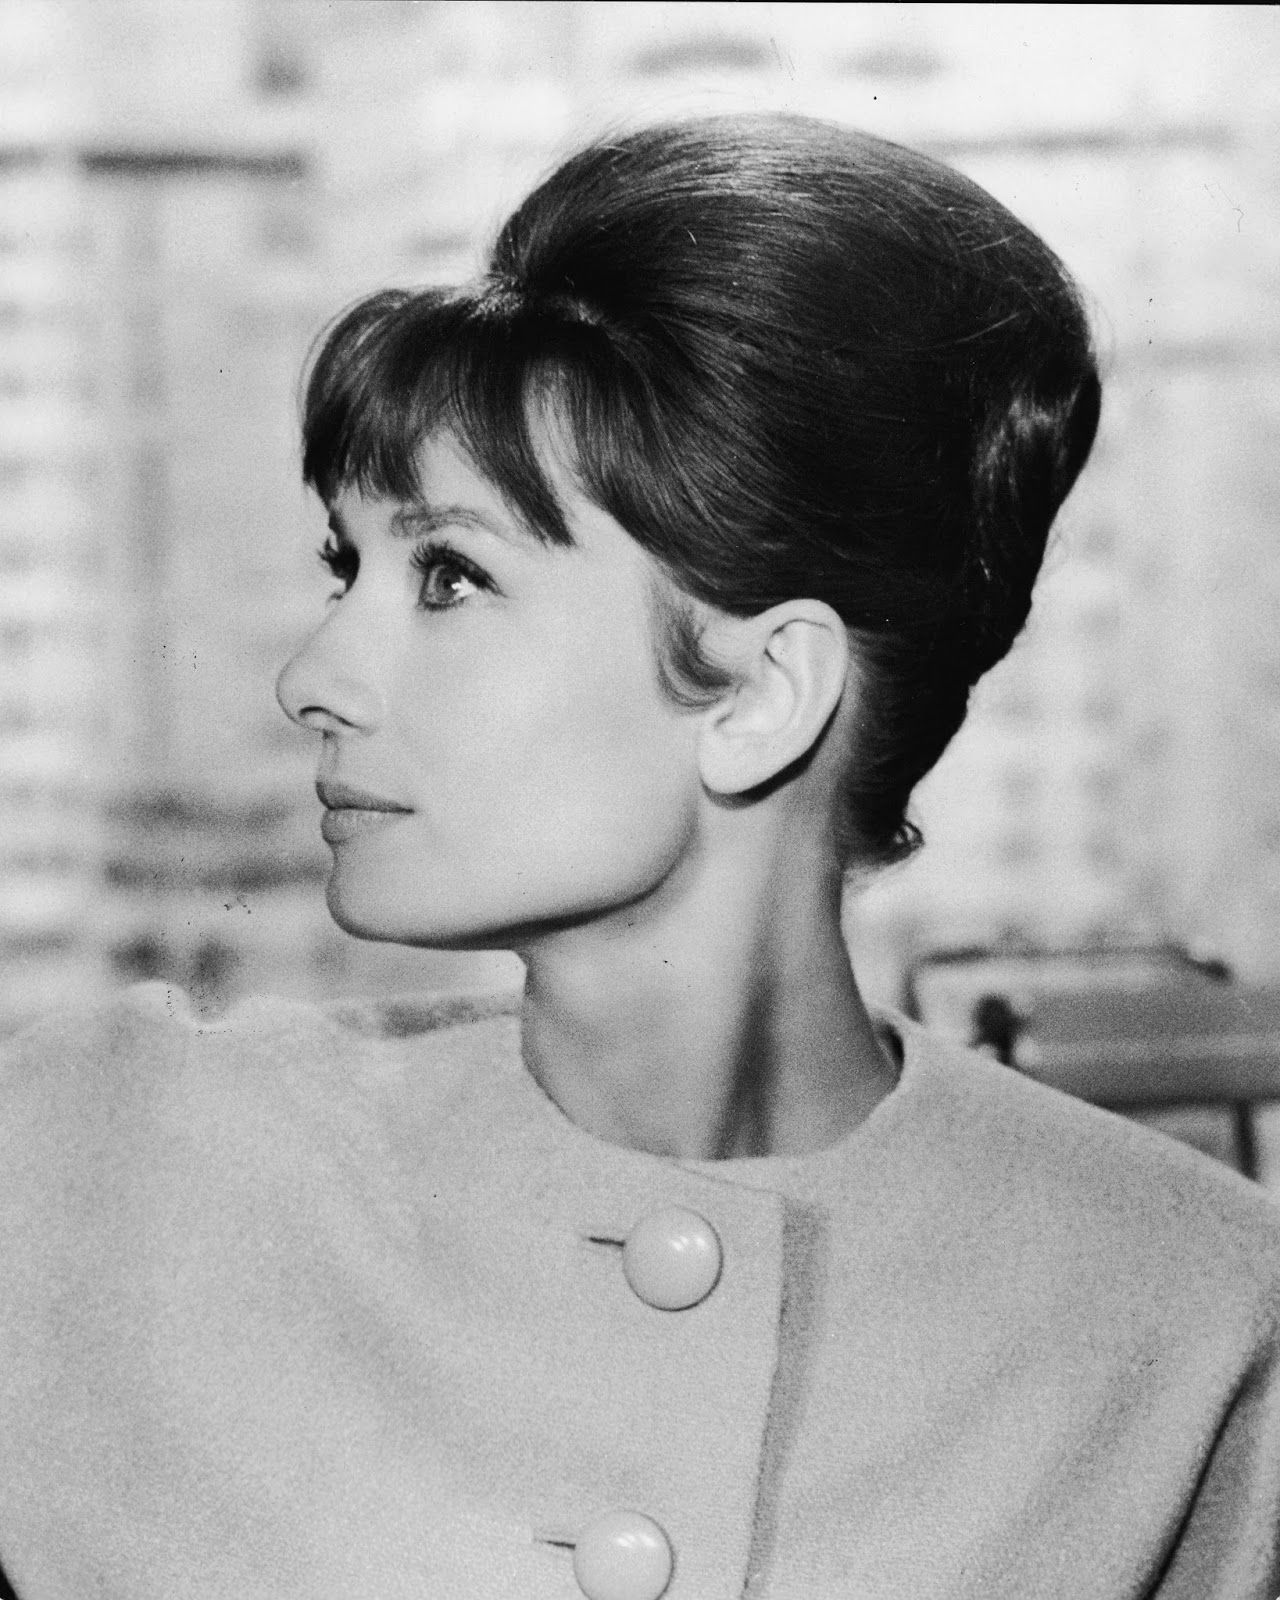 See 7 big pictures of the hottest short hairstyles from the '60s - Click  Americana